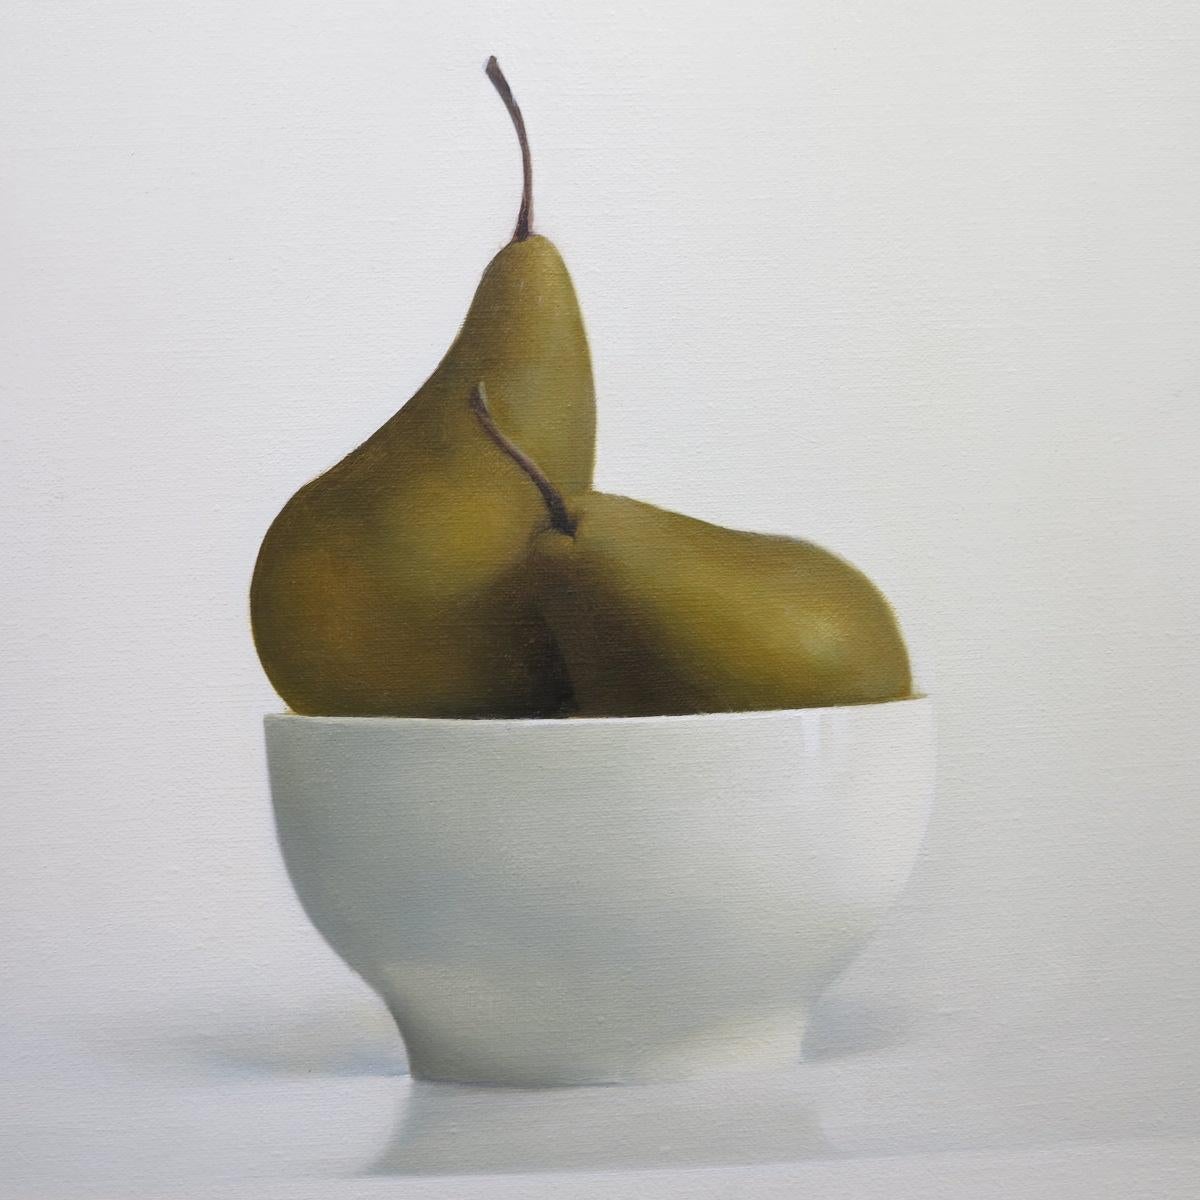 On White #3 (Pears Still Life fruit painting) - Painting by E. Allen